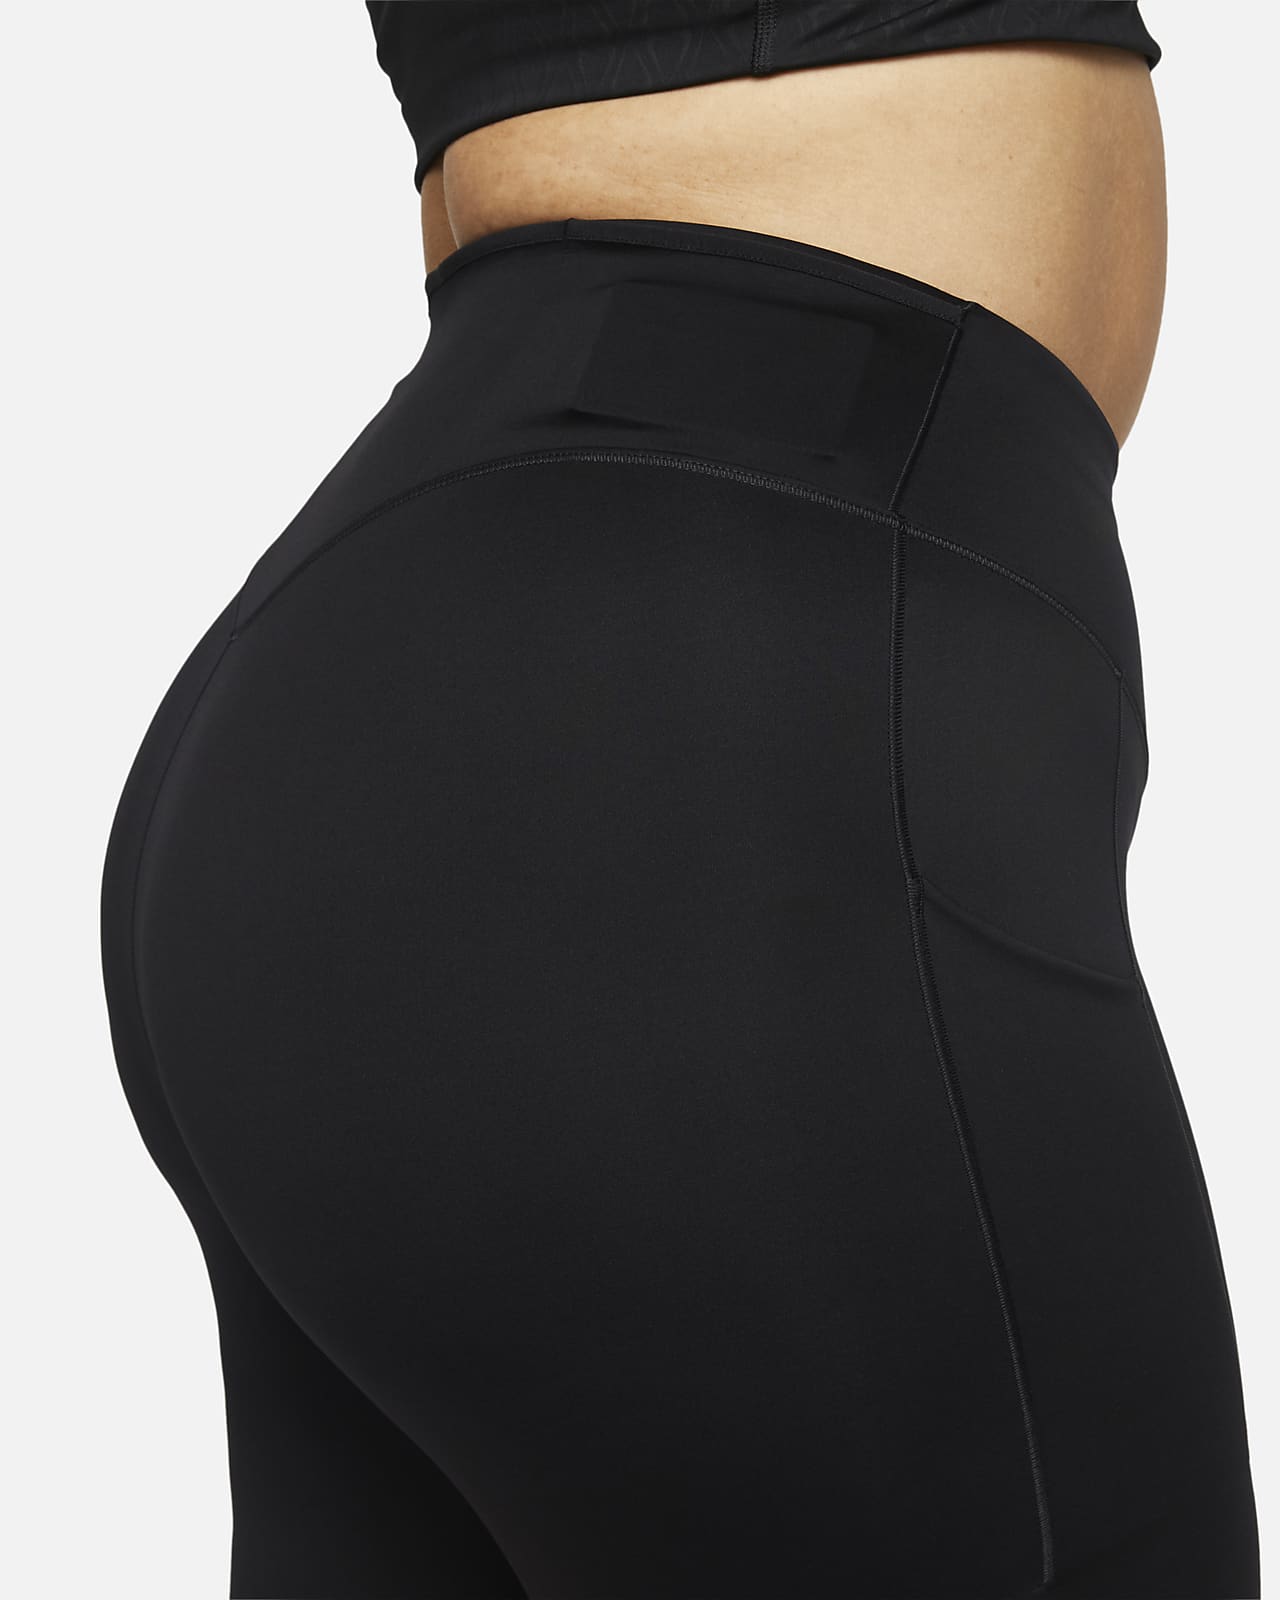 Women's Attack Shorts from Nike – The Bowdoin Store